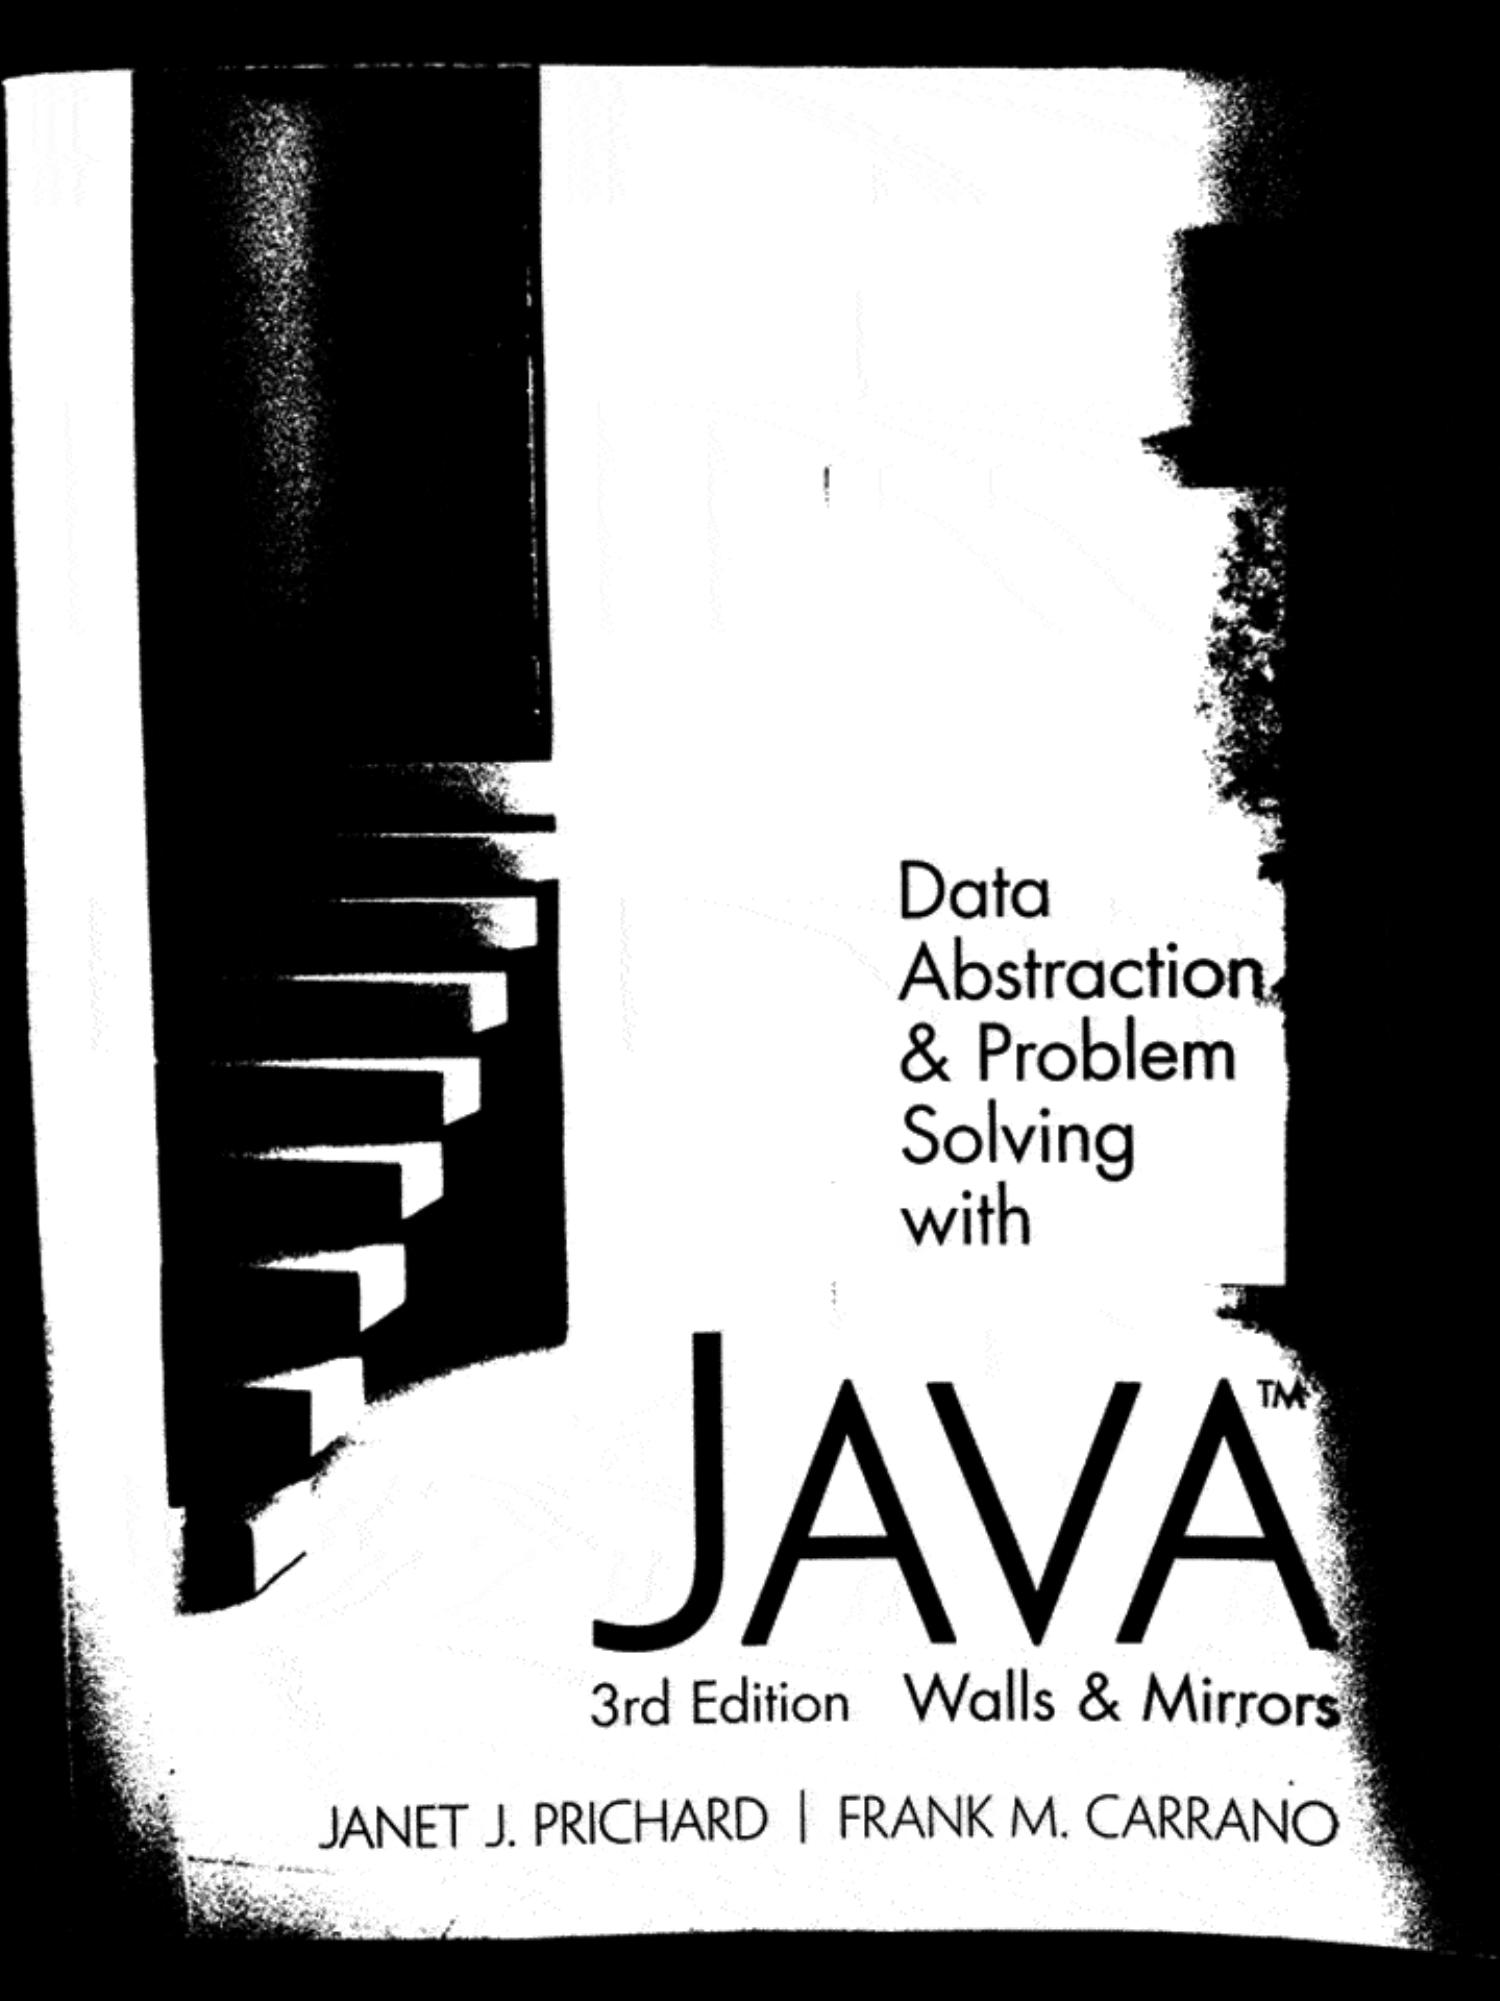 Data Abstraction & Problem Solving with Java- Walls and Mirrors ( PDFDrive.com )